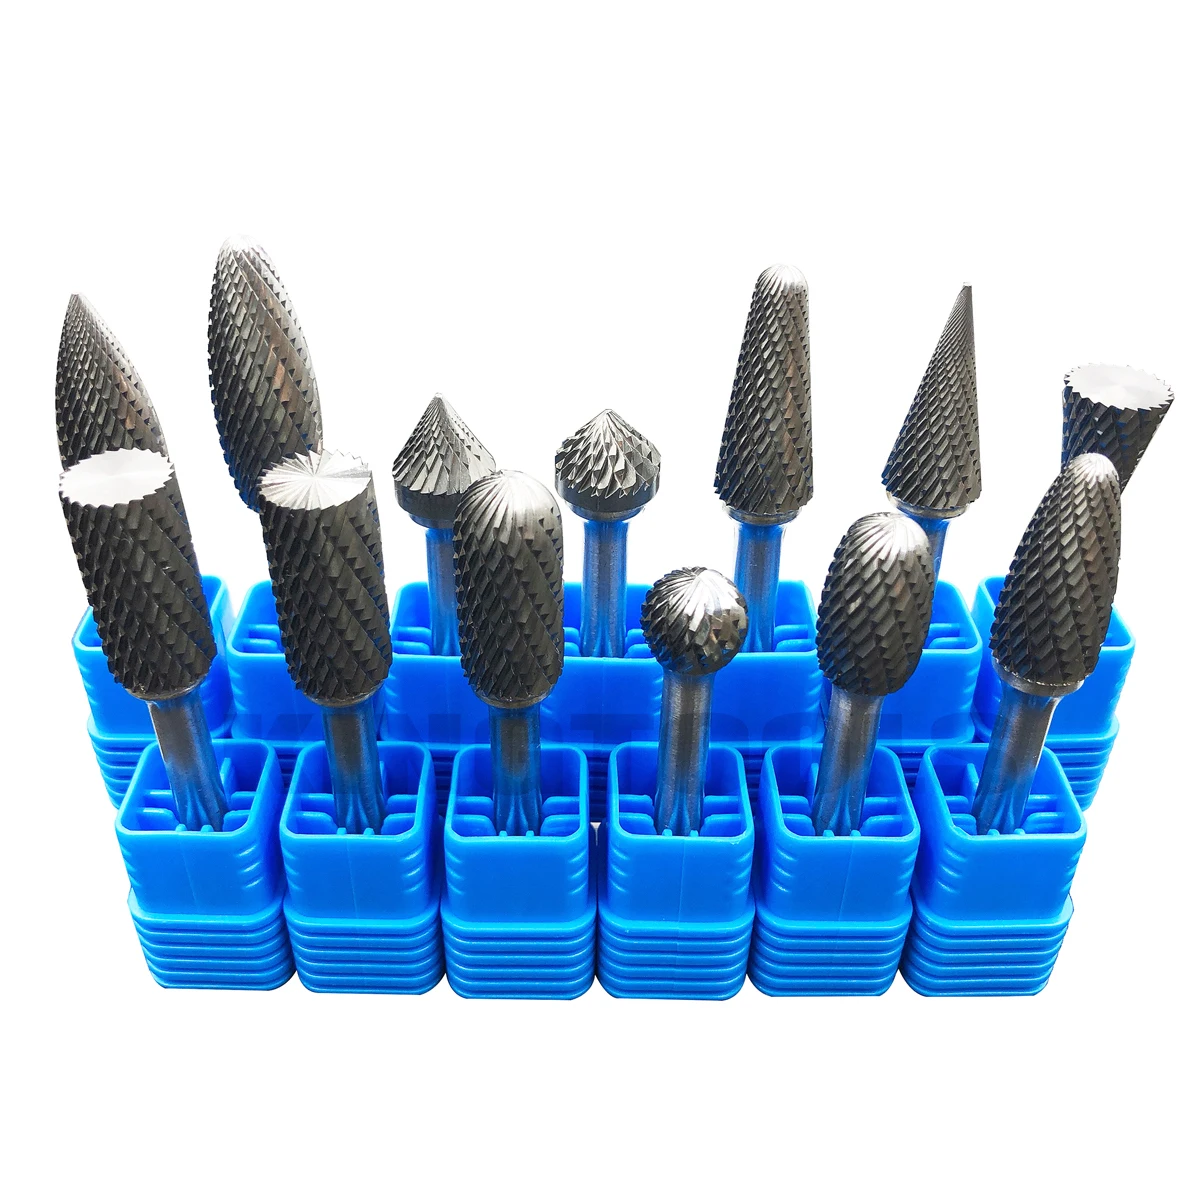 for Die Grinder Drill Bit Alloy Steel Hard Metal Carving Polishing 3pcs uxcell Tungsten Carbide Rotary Files 1/8 Shank Single Cut Oval Shape Rotary Burrs Tool 6mm Dia 